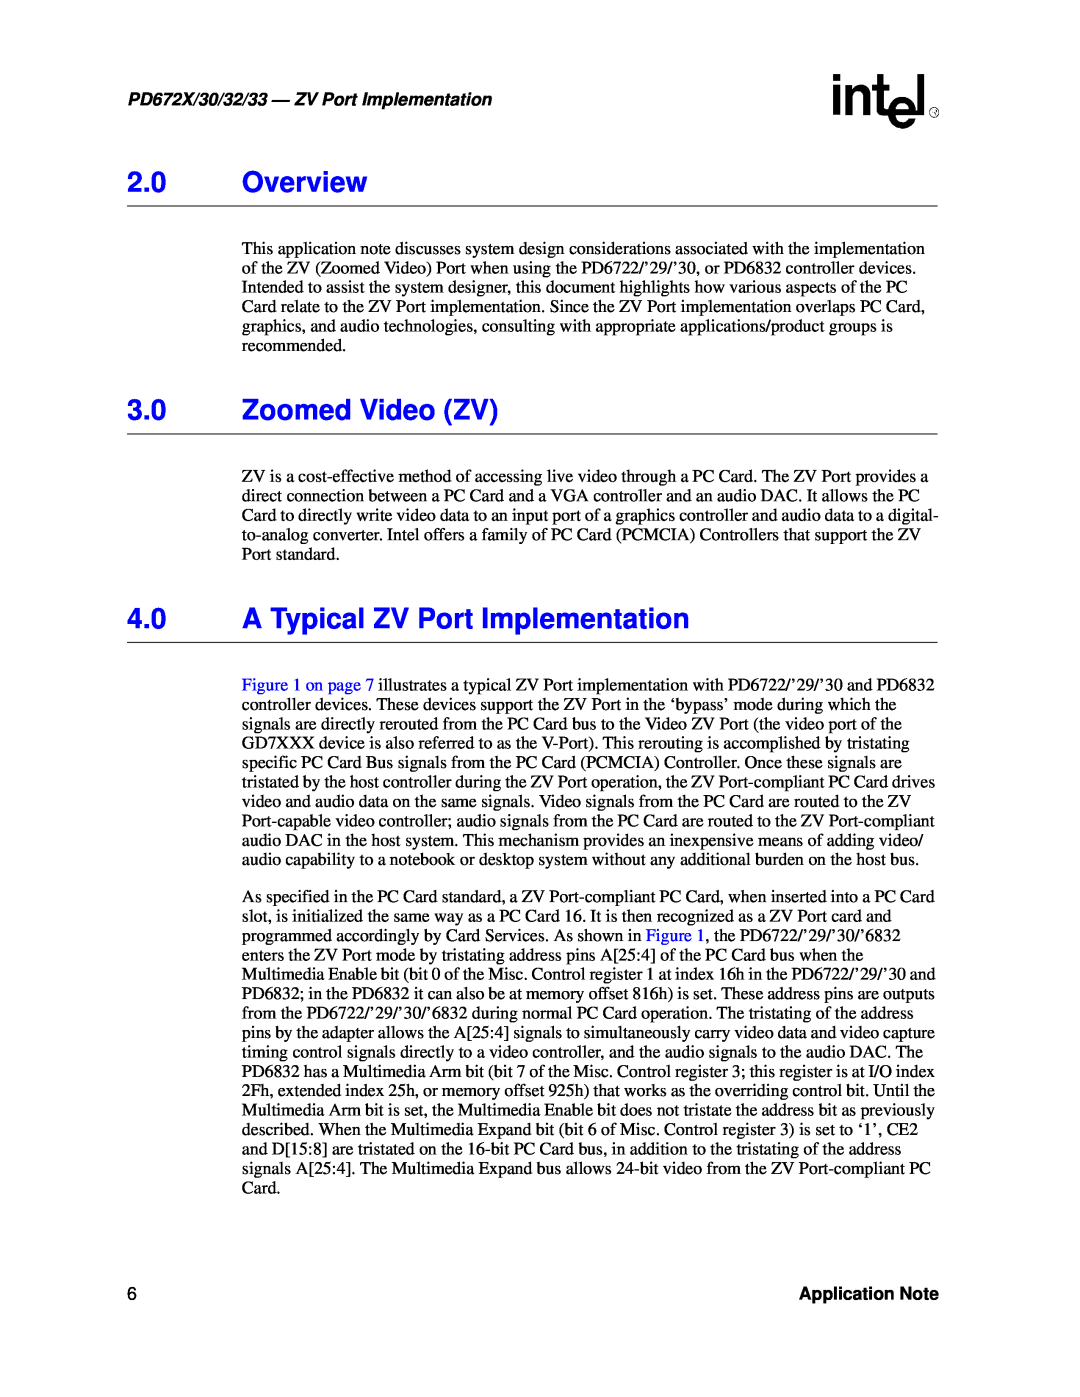 Intel PD672X/30/32/33 manual 2.0Overview, 3.0Zoomed Video ZV, 4.0A Typical ZV Port Implementation, Application Note 